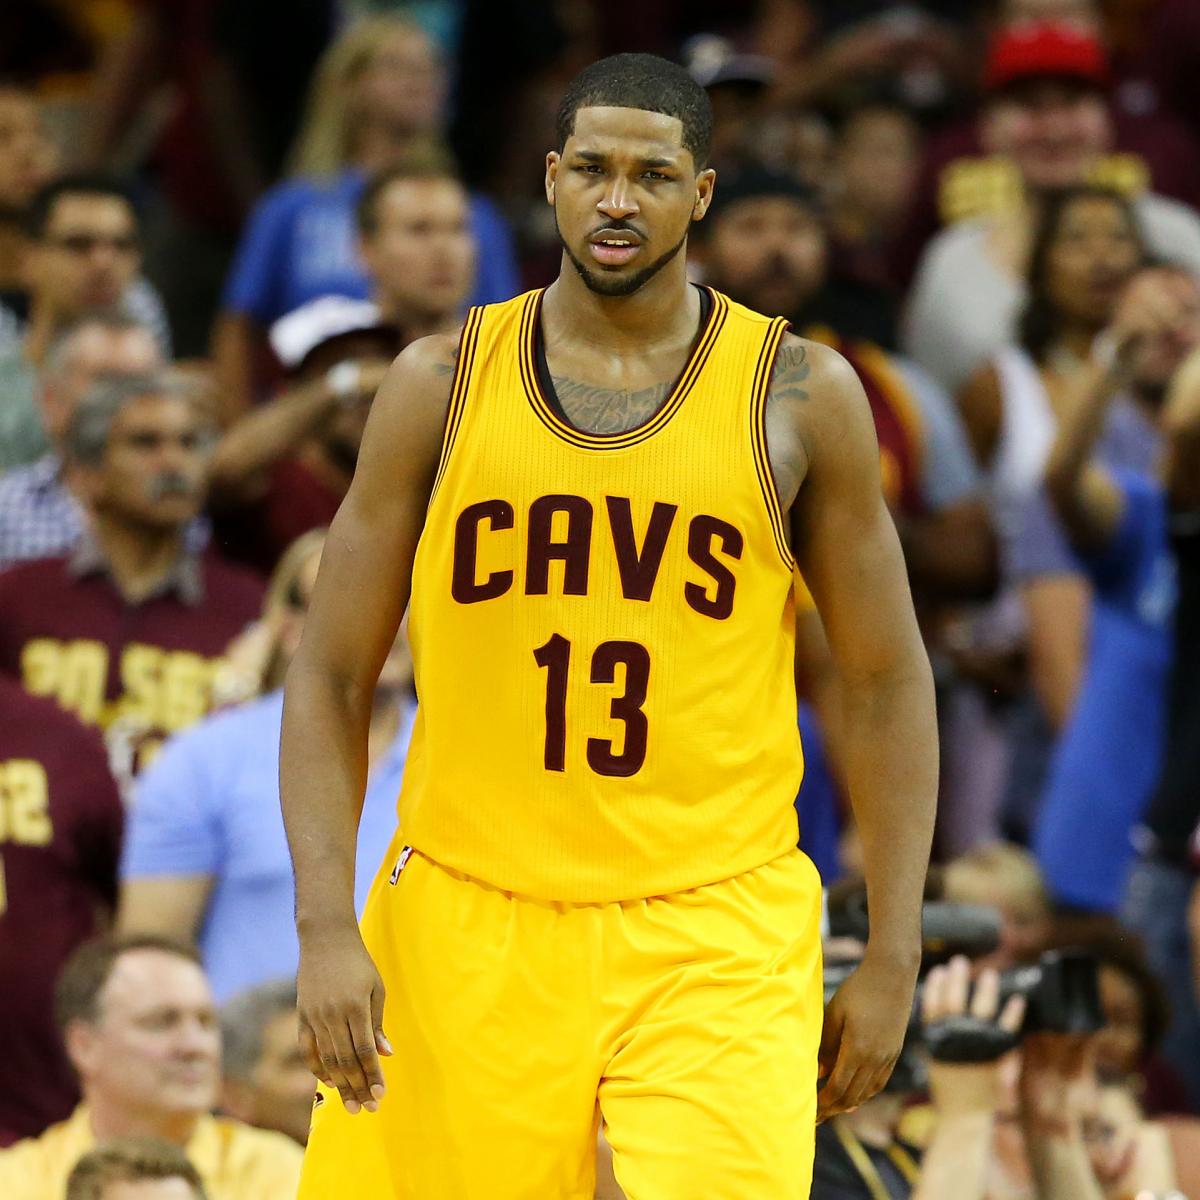 Tristan Thompson Free Agency Puts Cavs in Awkward Position